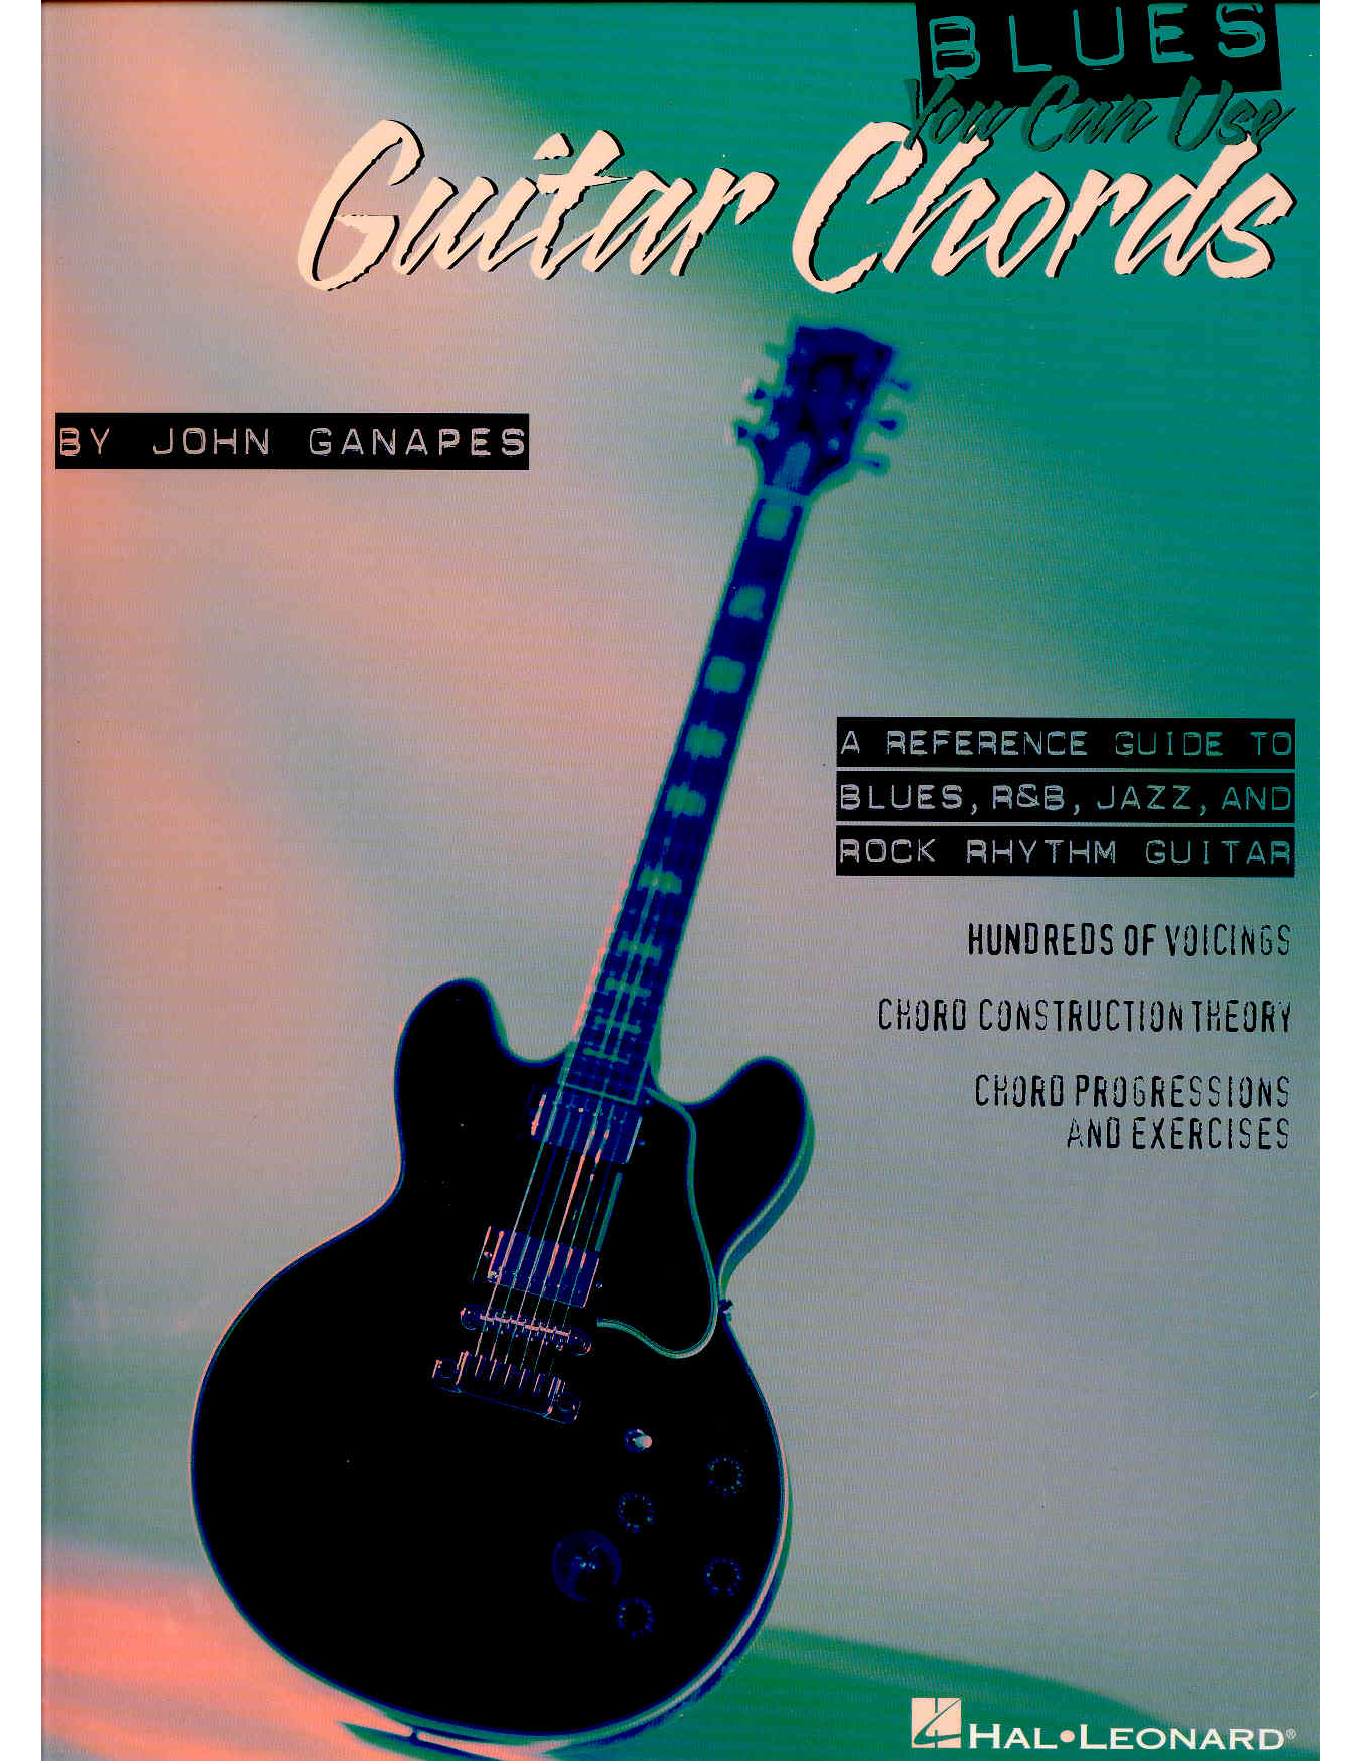 BLUES_You_Can_Use_Guitar_Chords_BY_JOHN_GANAPES_页面_001.png